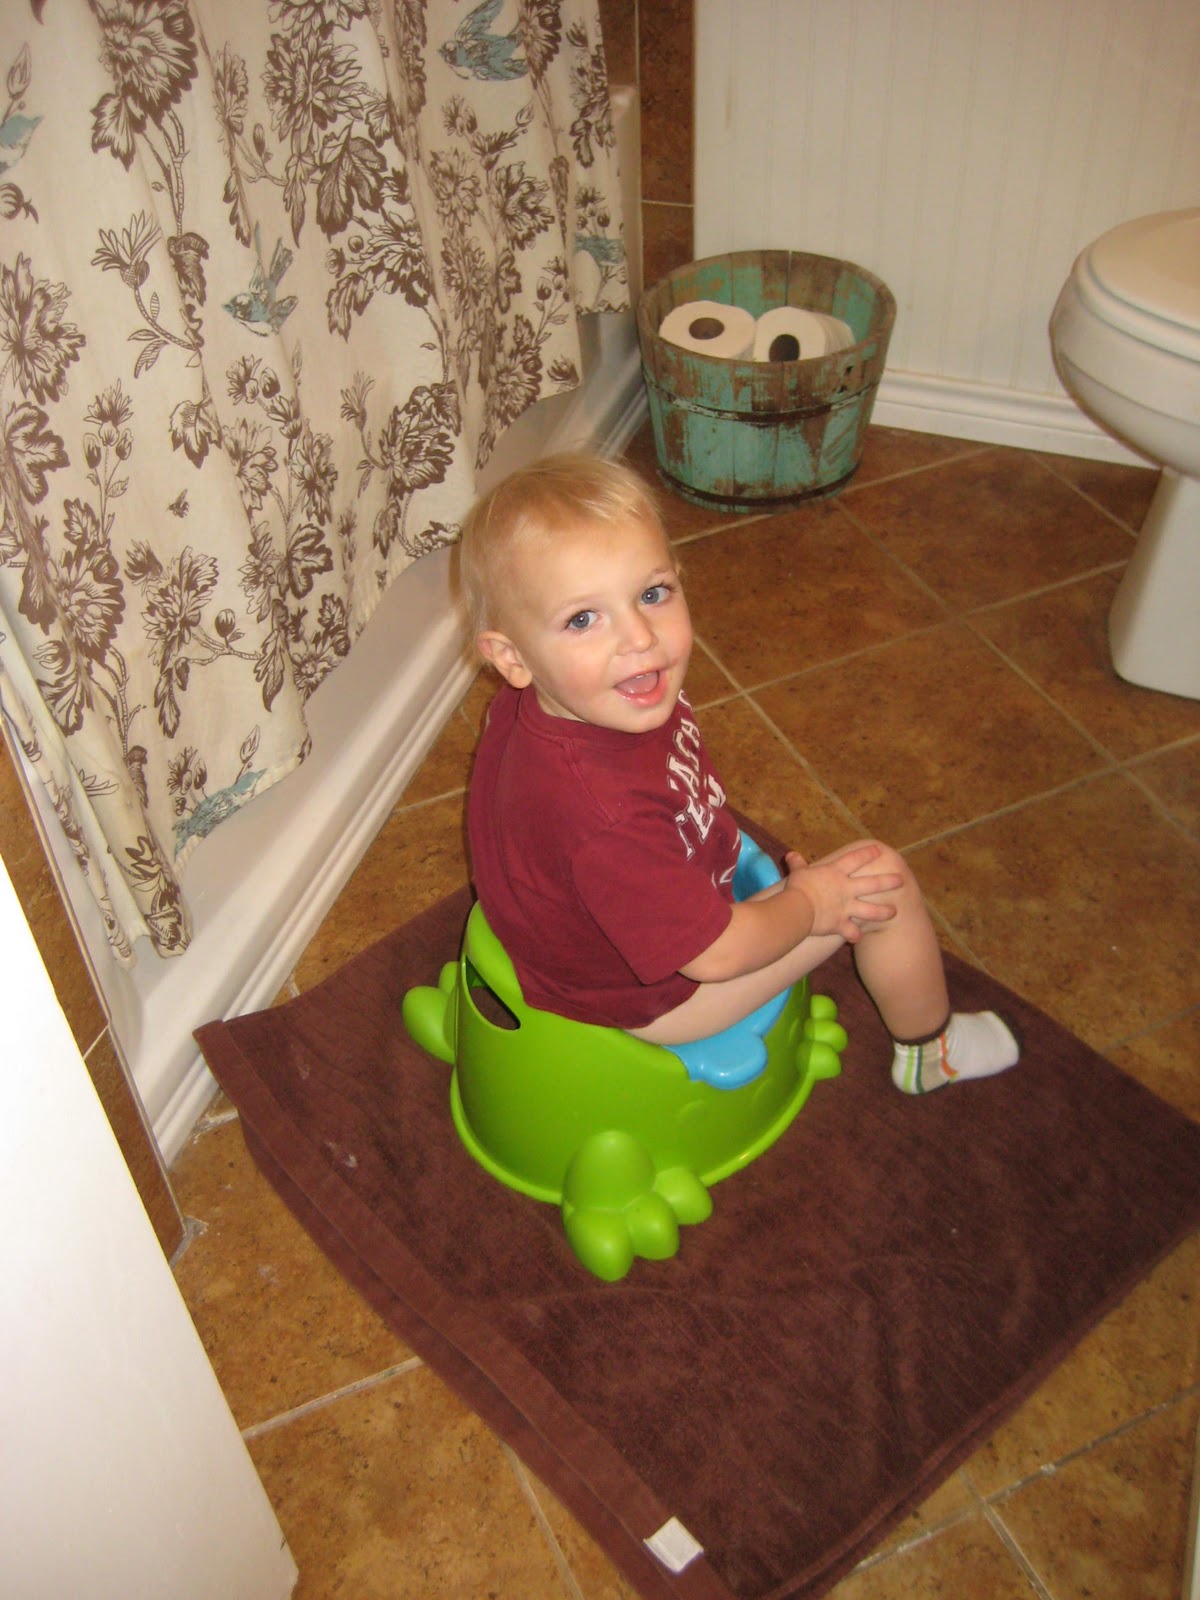 Let's Hear it for the Boys: It's Potty Time...